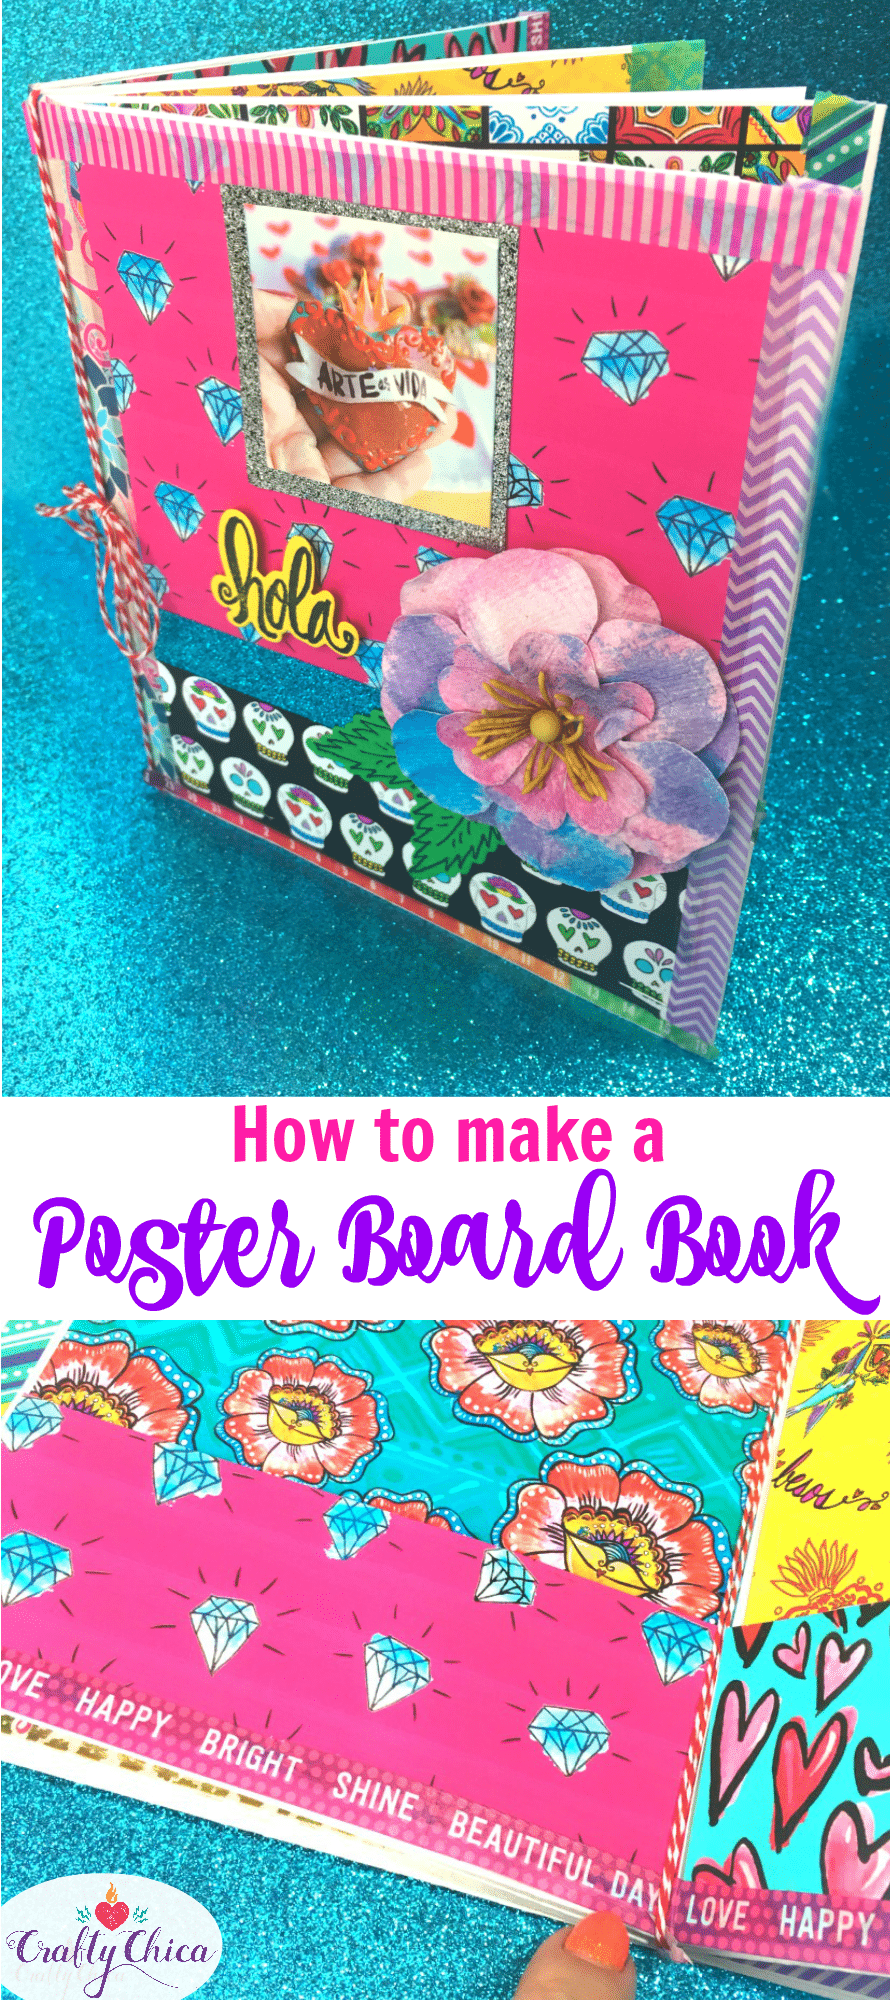 How to make a book by folding poster board